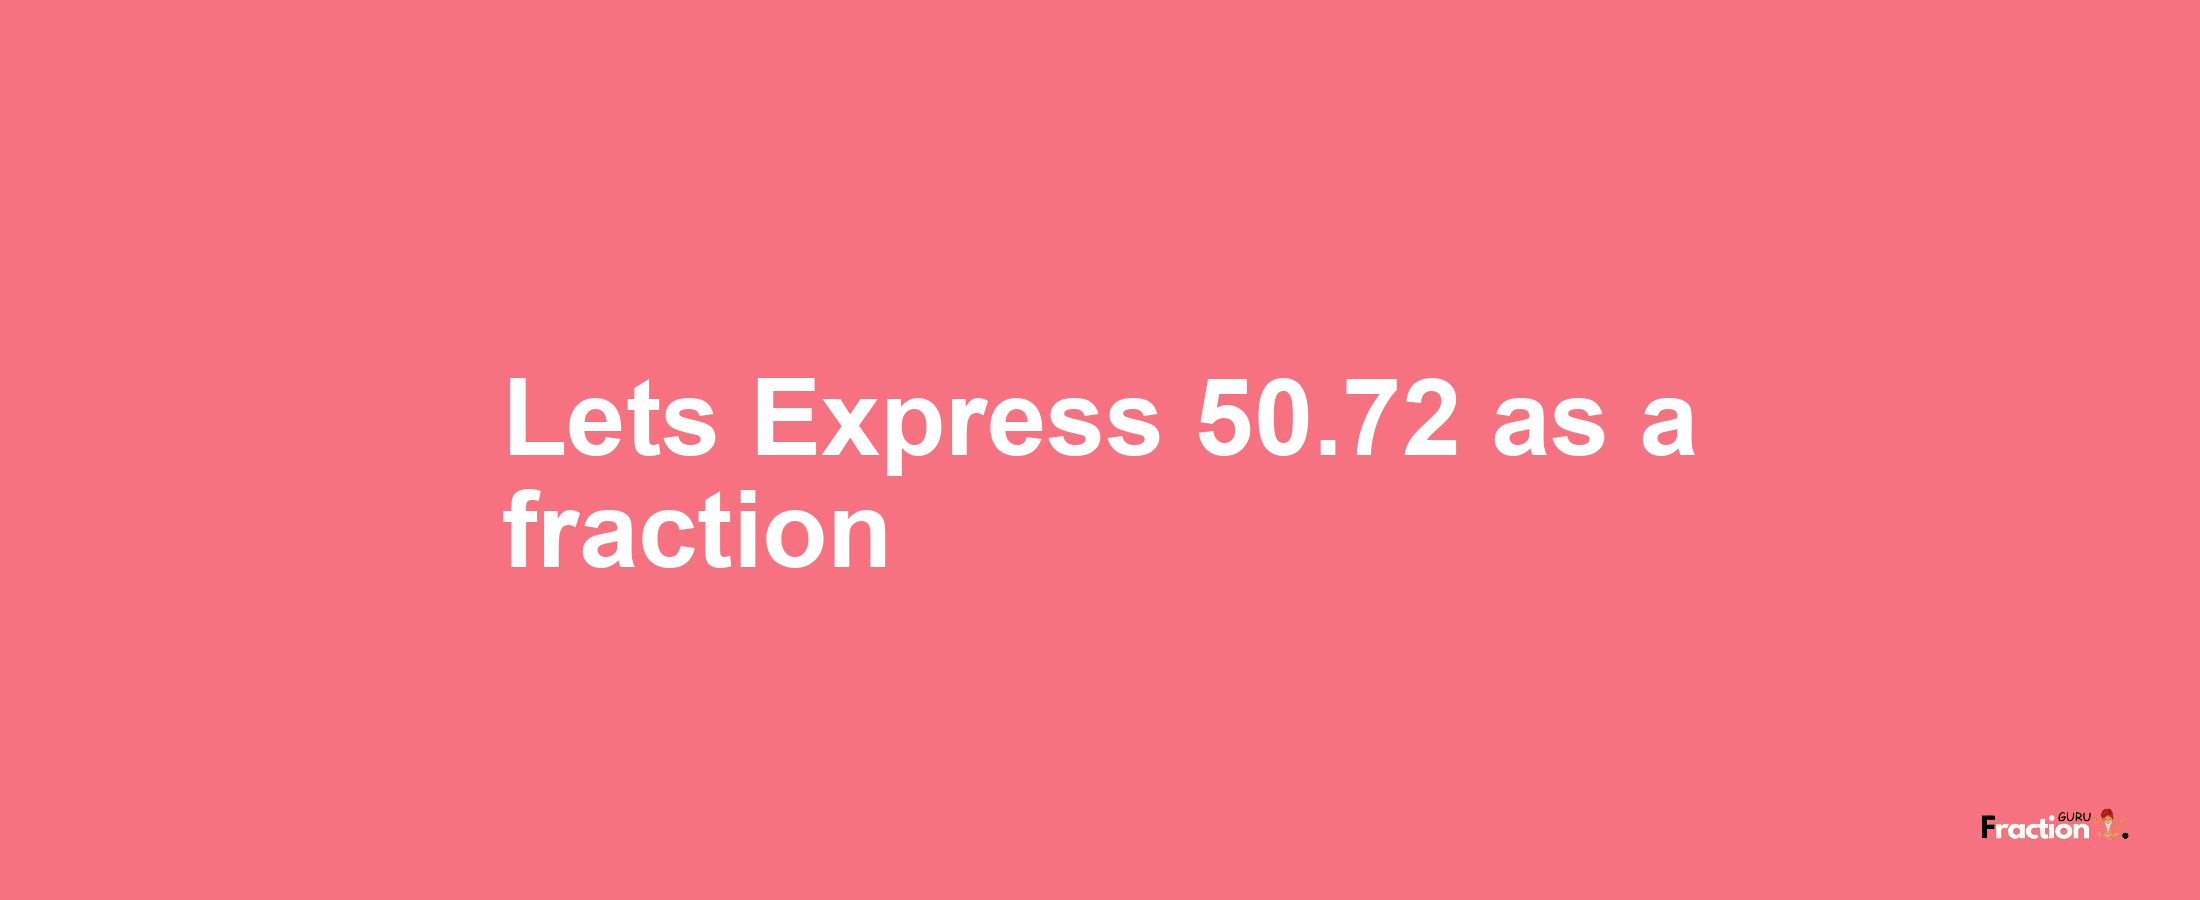 Lets Express 50.72 as afraction